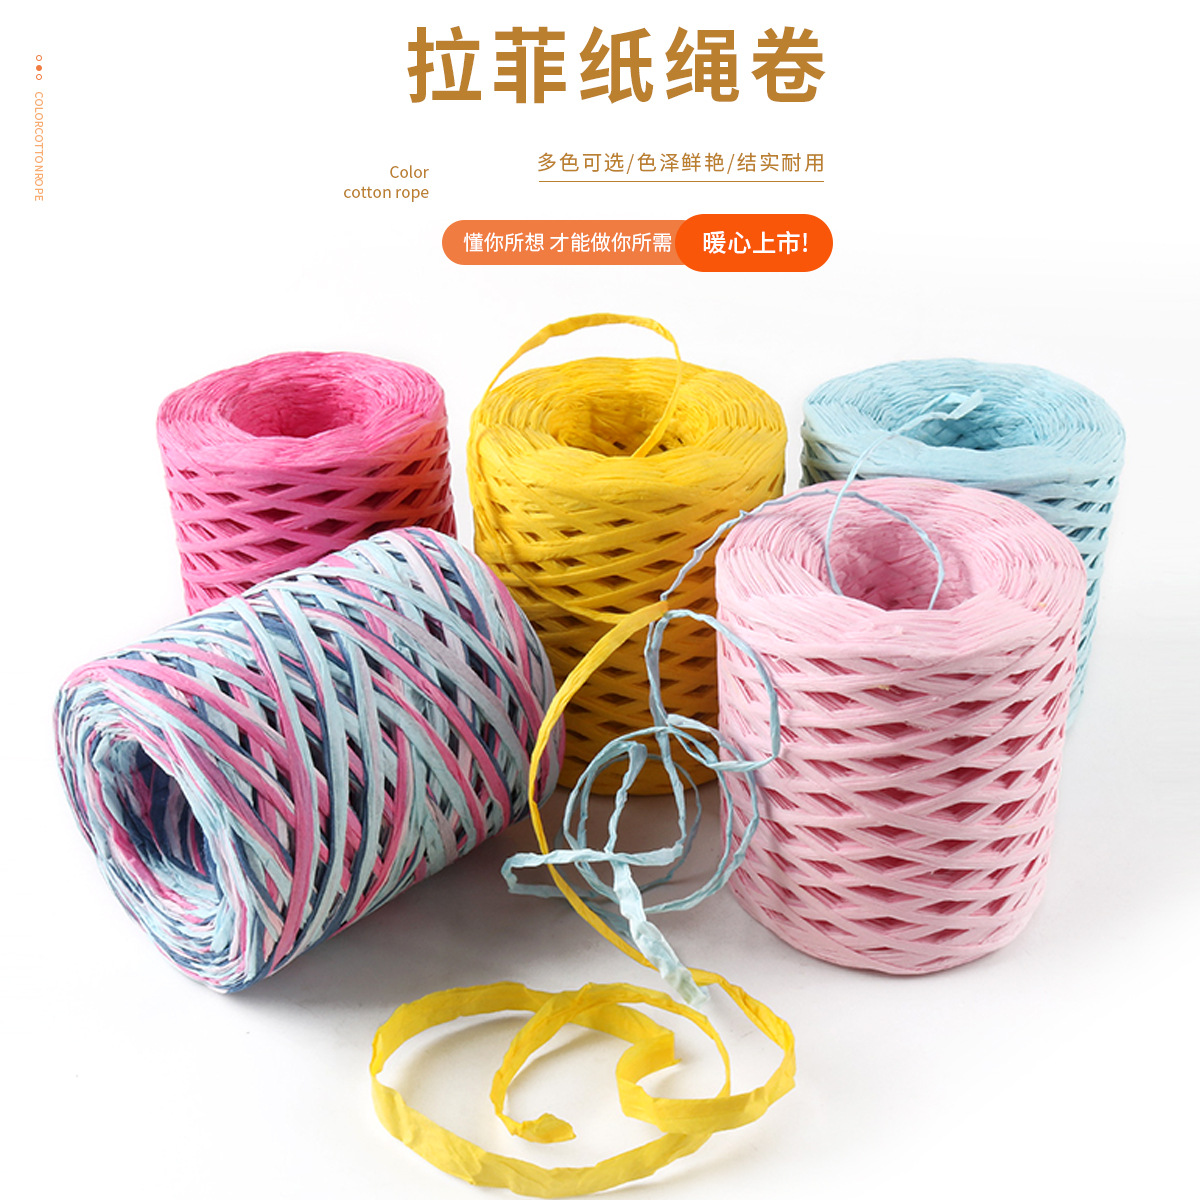 200m kindergarten hand-knitted rope, col...